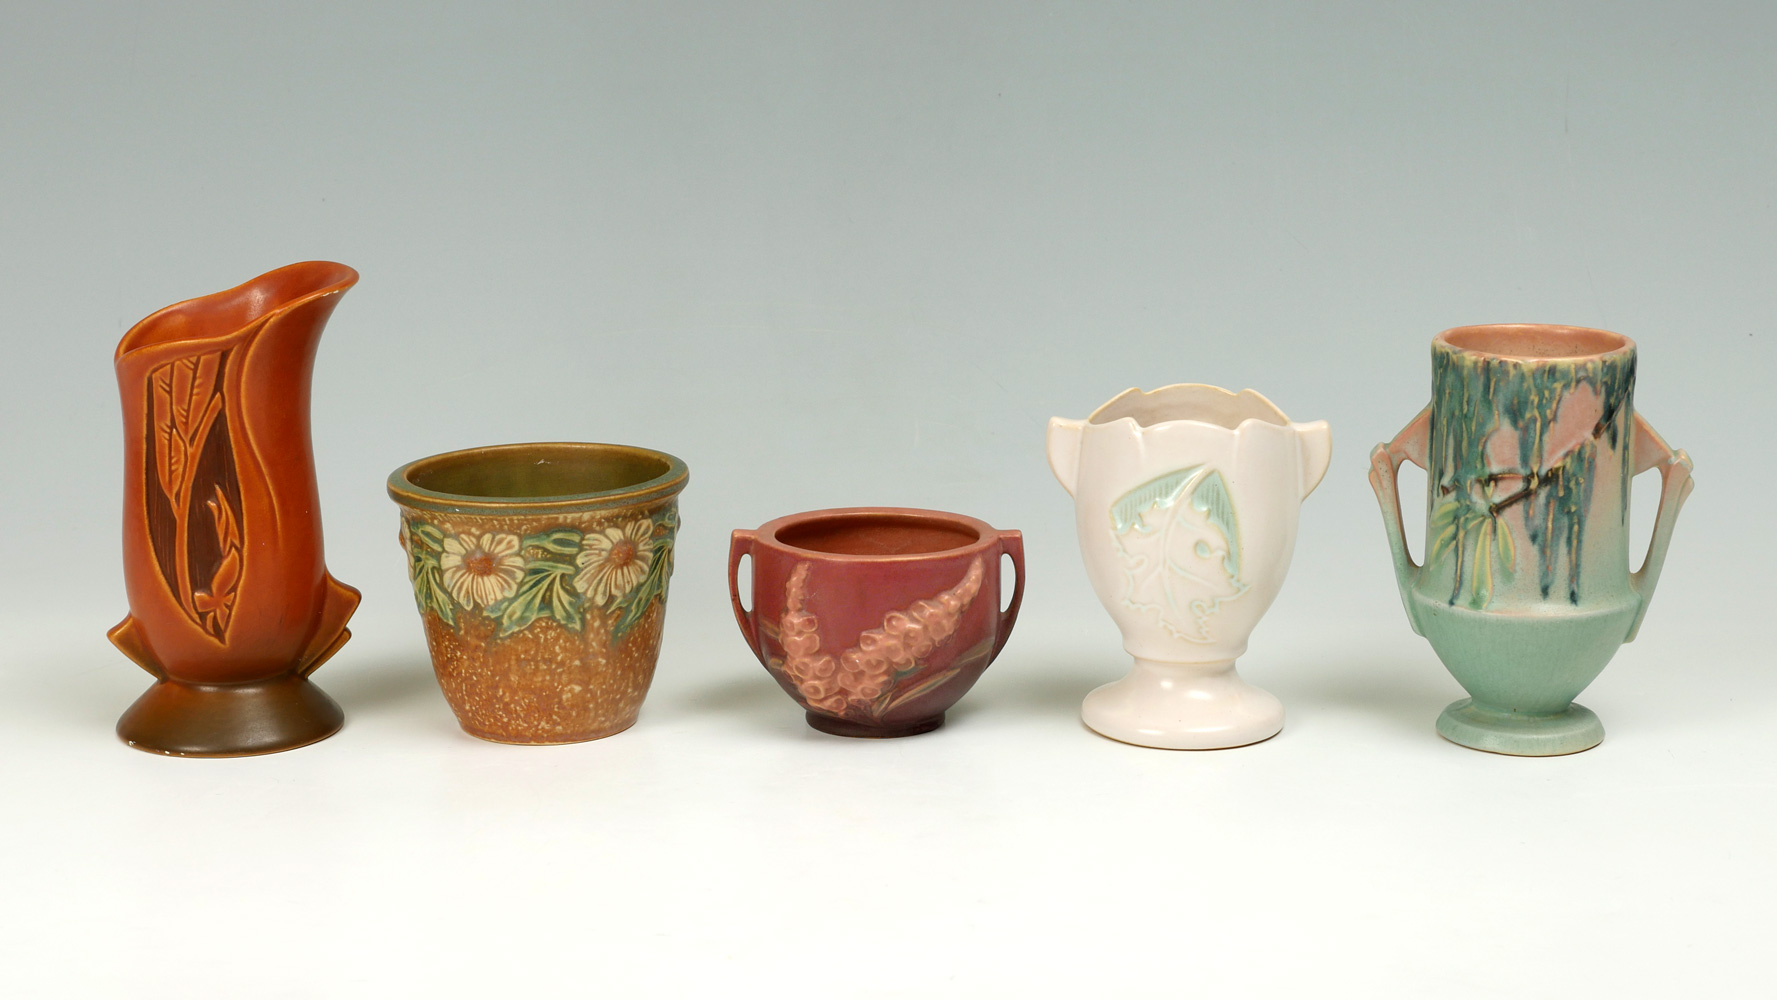 5 PIECE ROSEVILLE POTTERY COLLECTION: